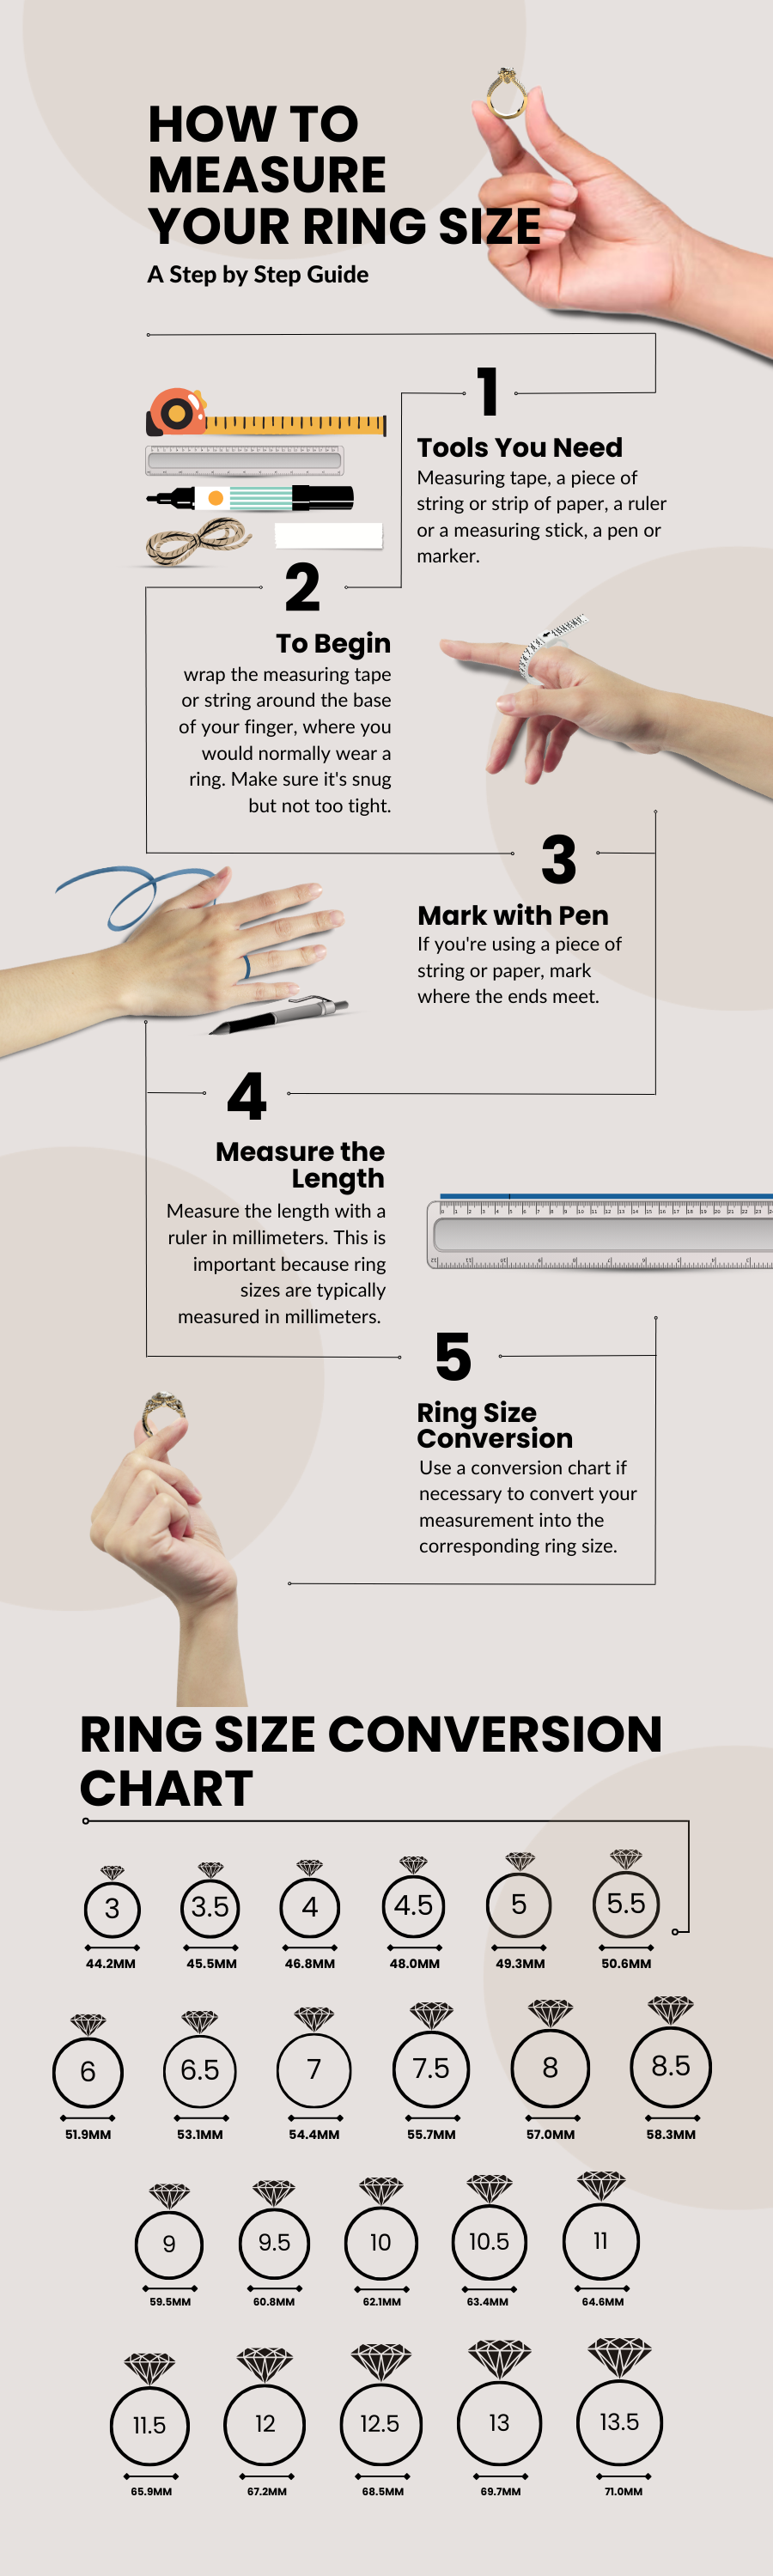 Guide to Measure Your Ring Size